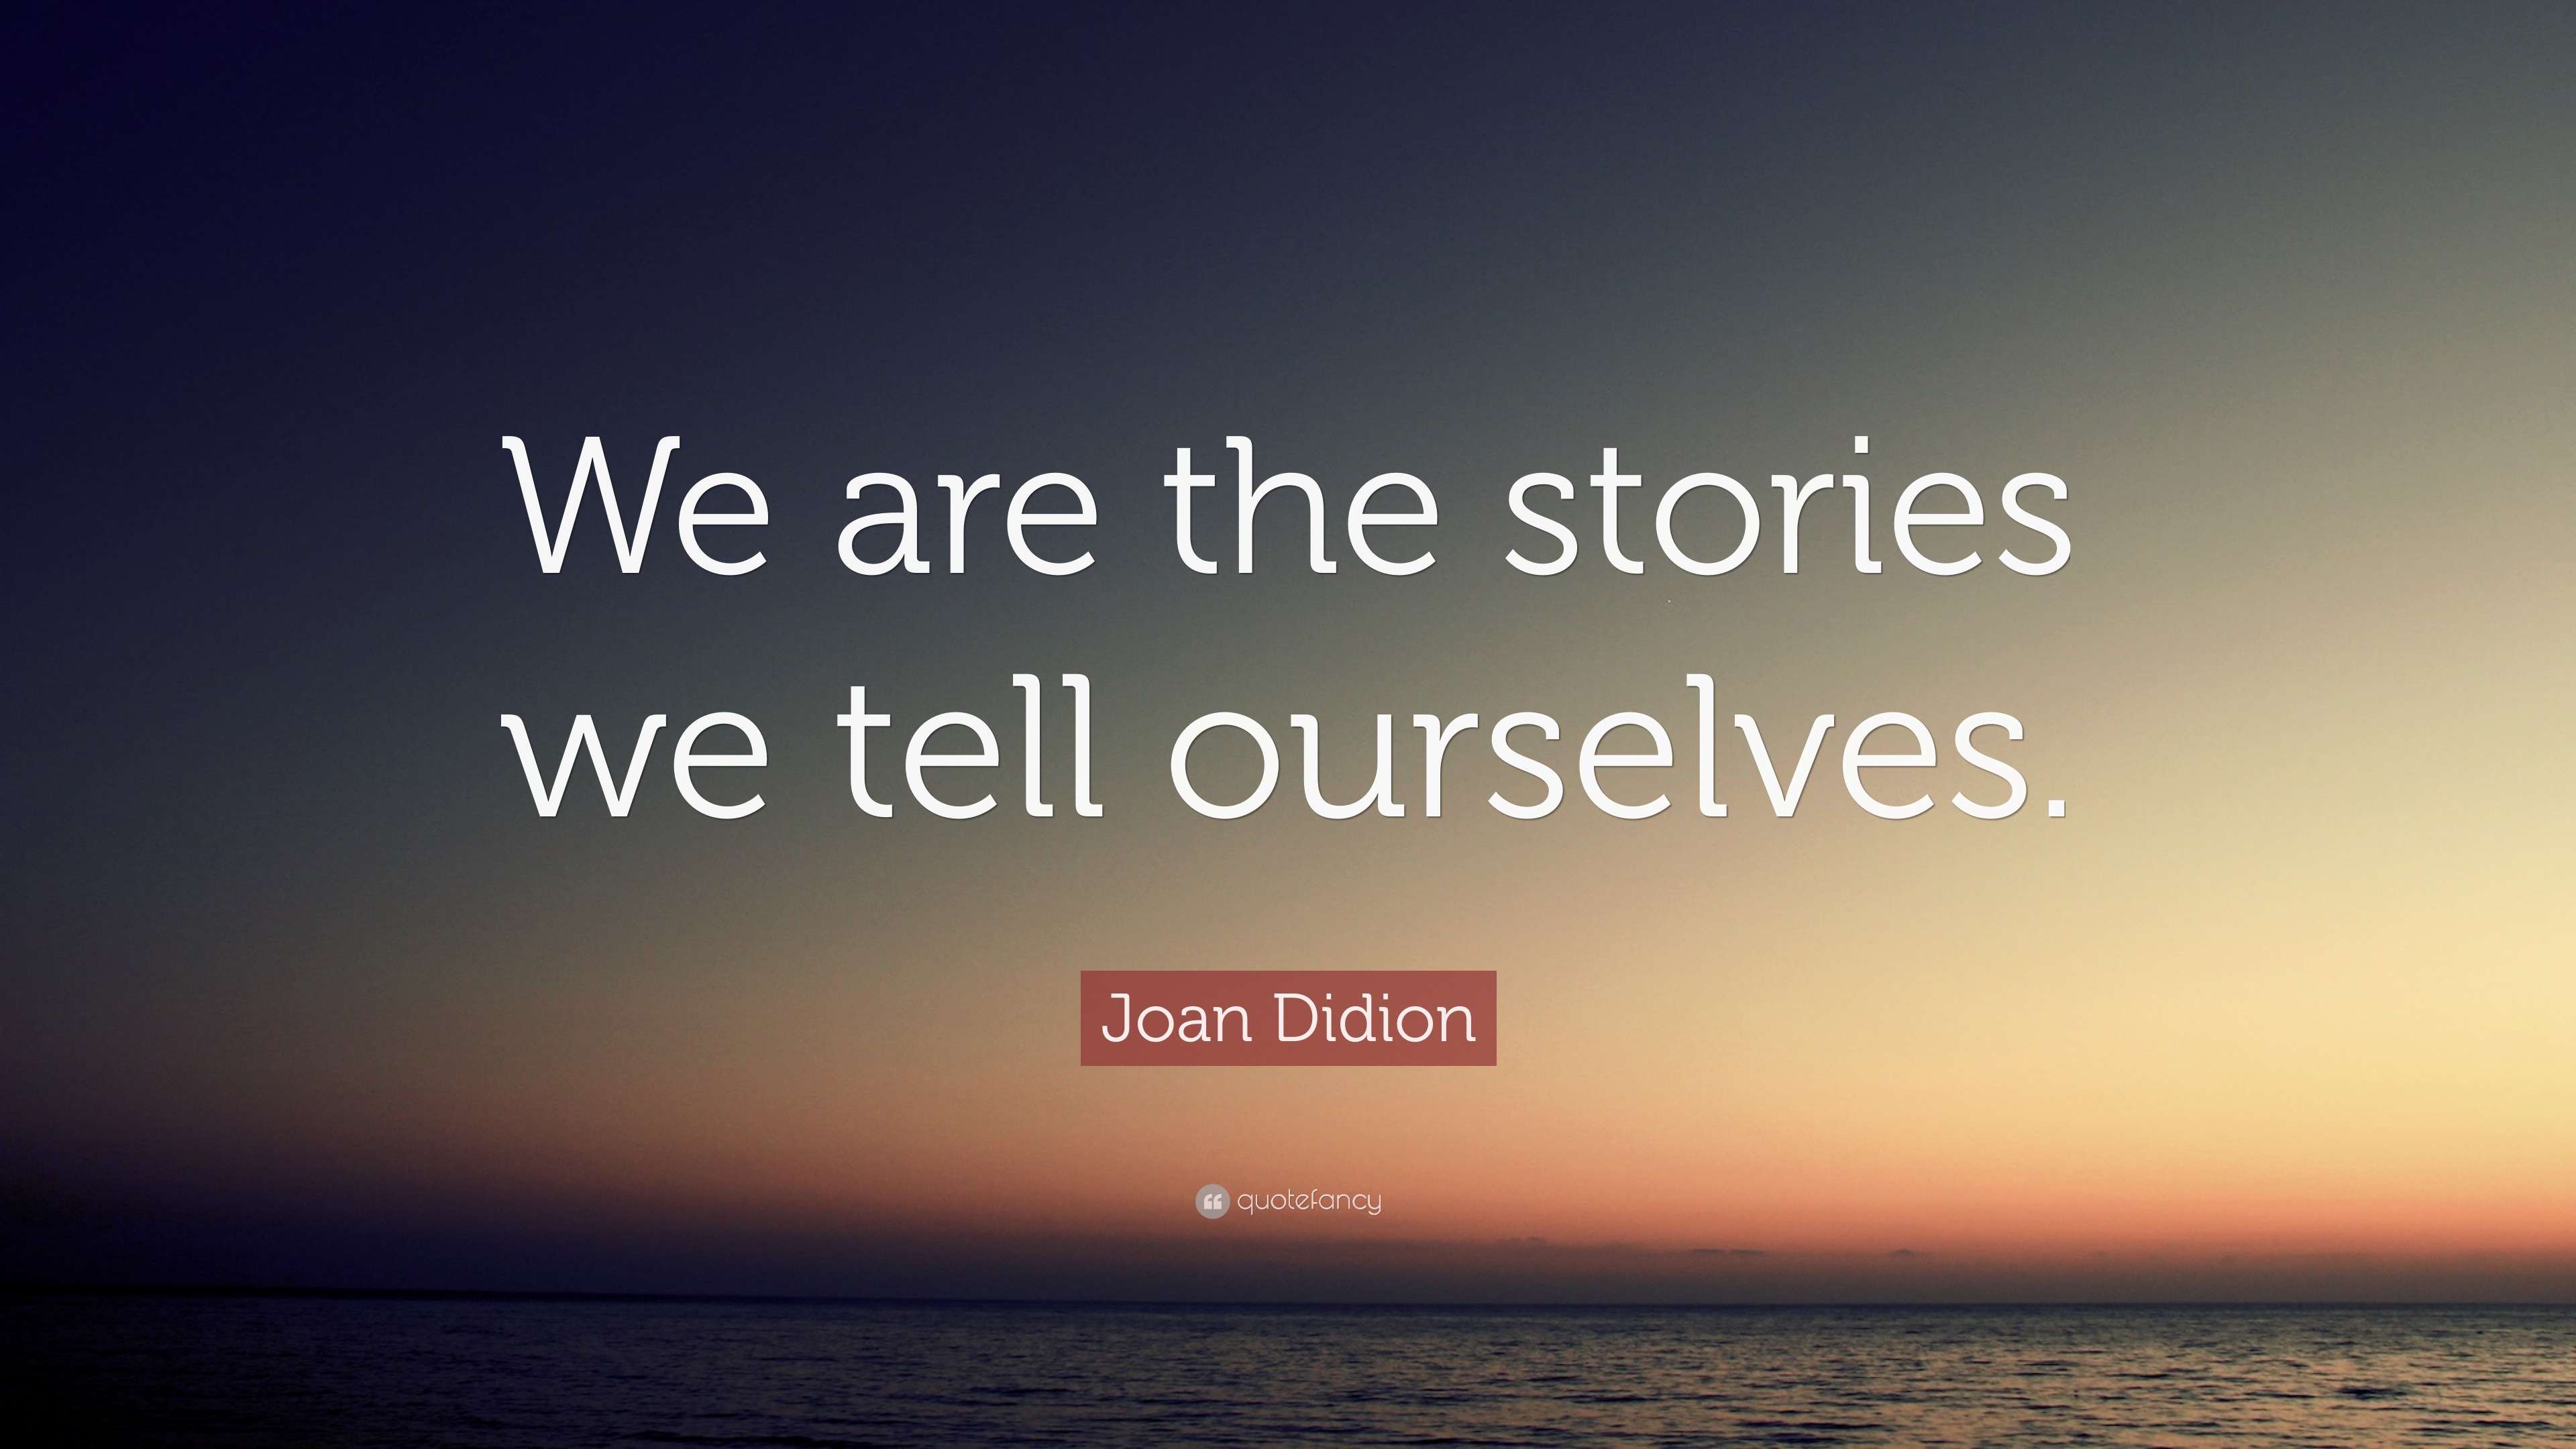 we tell ourselves stories in order to live meaning